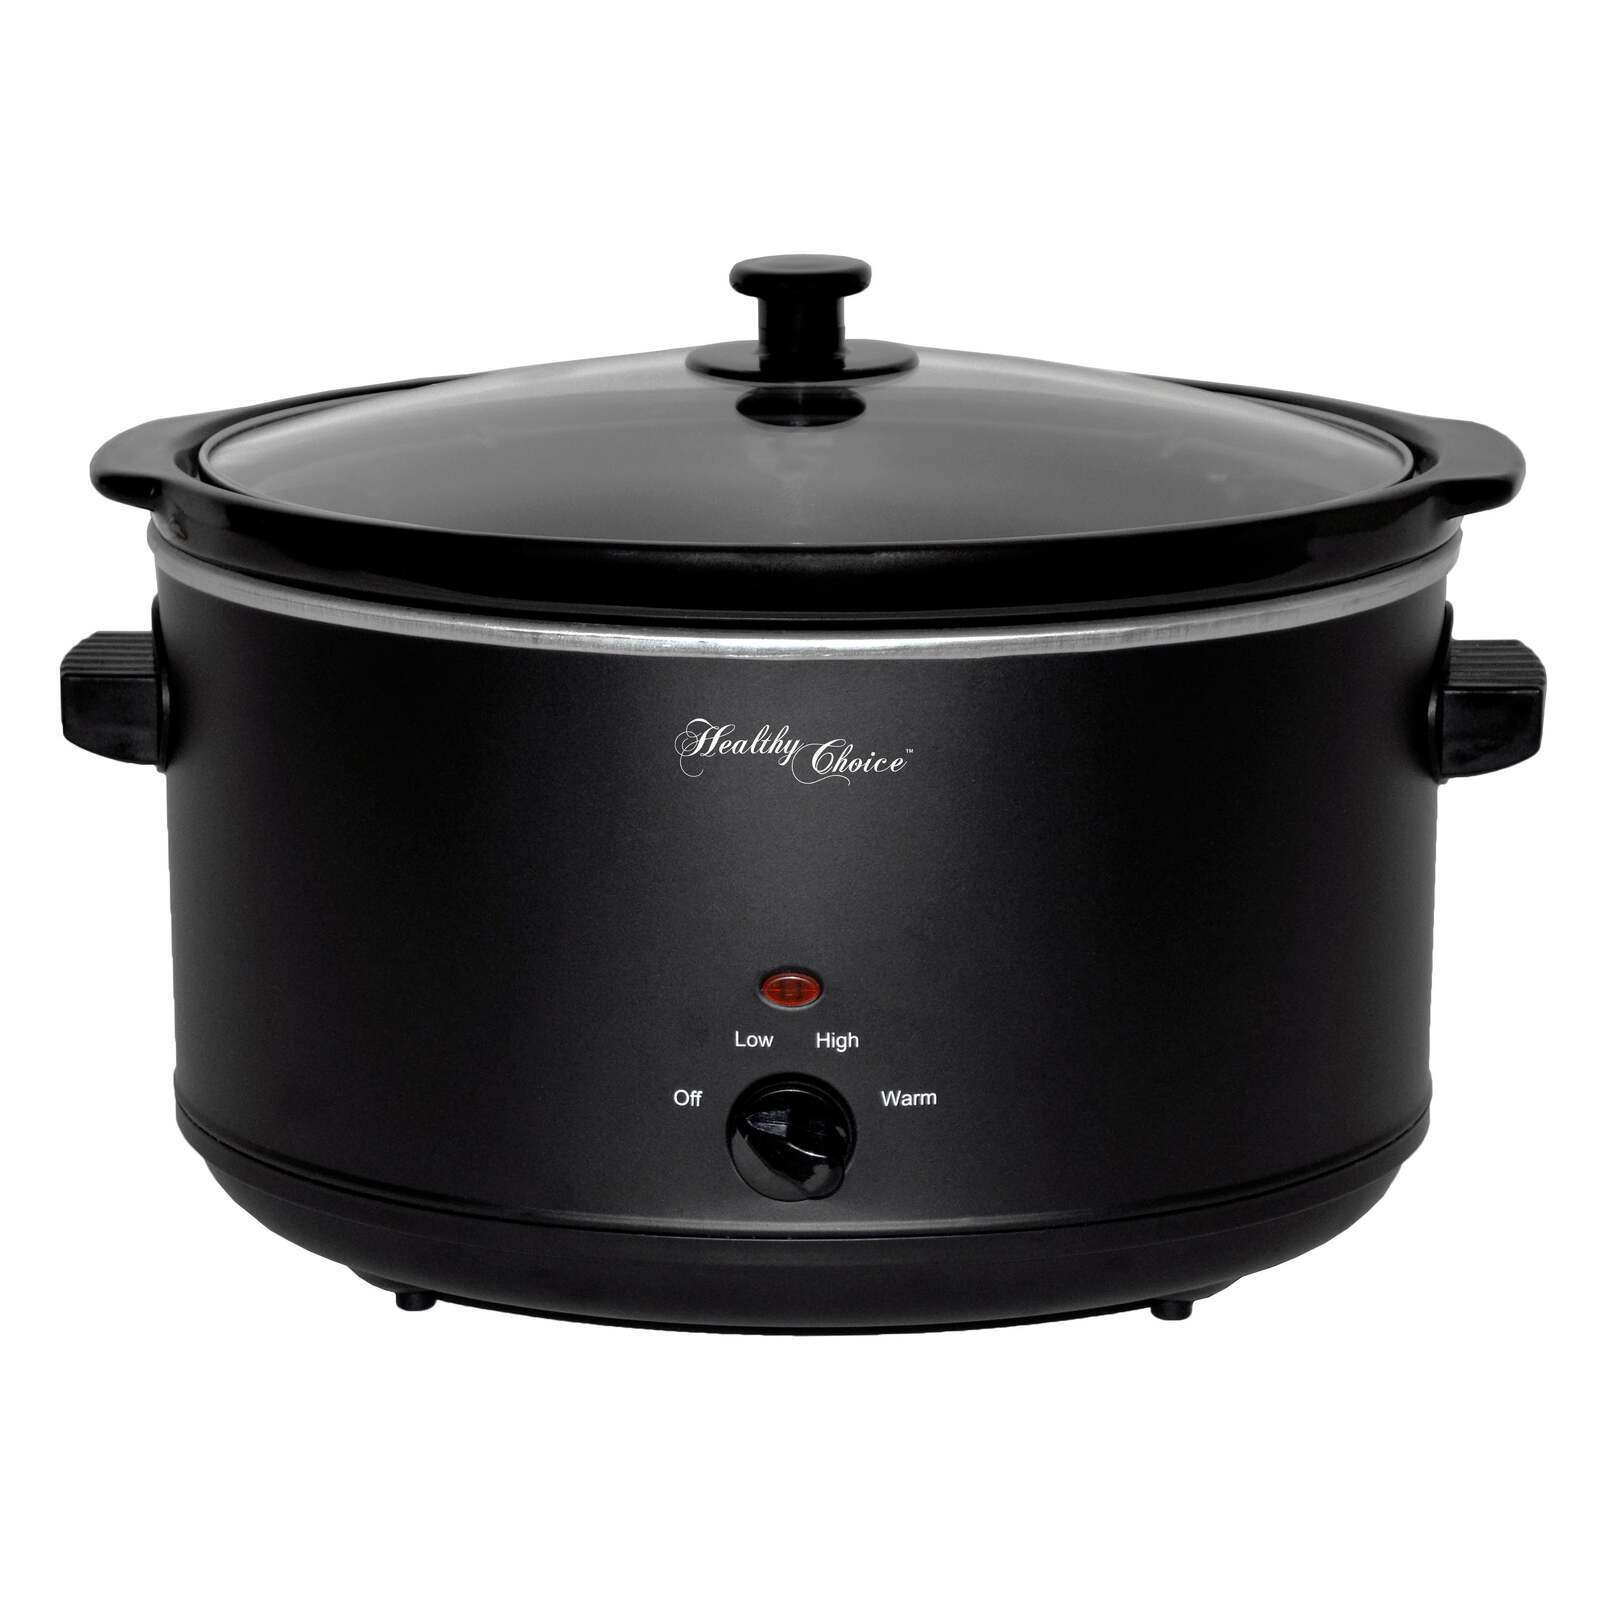 Healthy Choice SC800 Slow Cooker